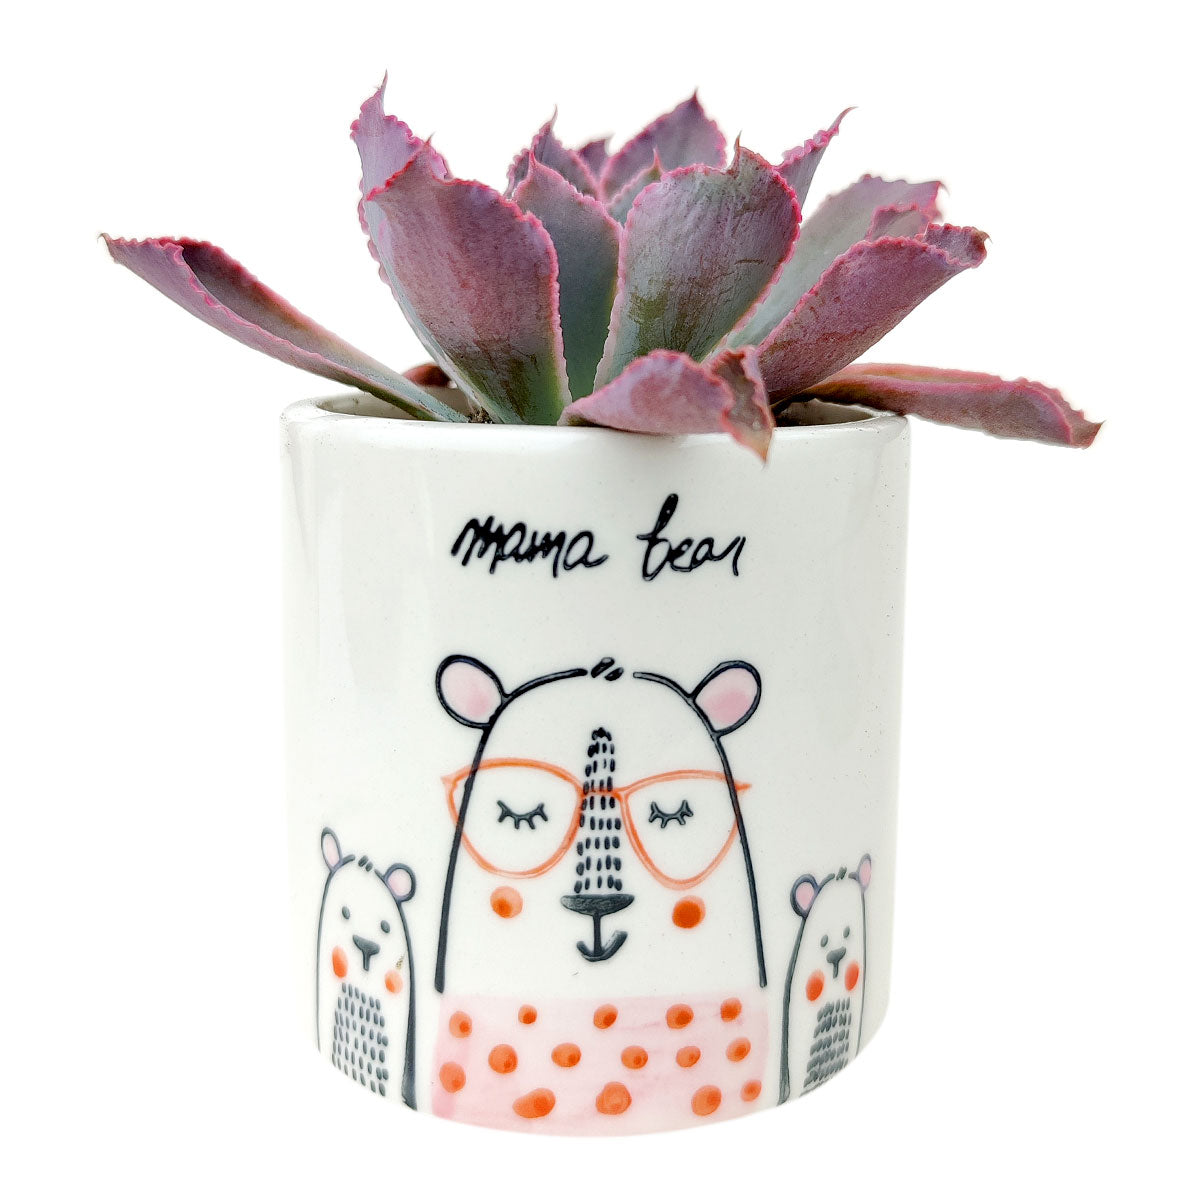 Mama Bear Pot for sale, Ceramic Pot for succulents and flowers, Modern style flower pot for sale, Succulent gift decor ideas